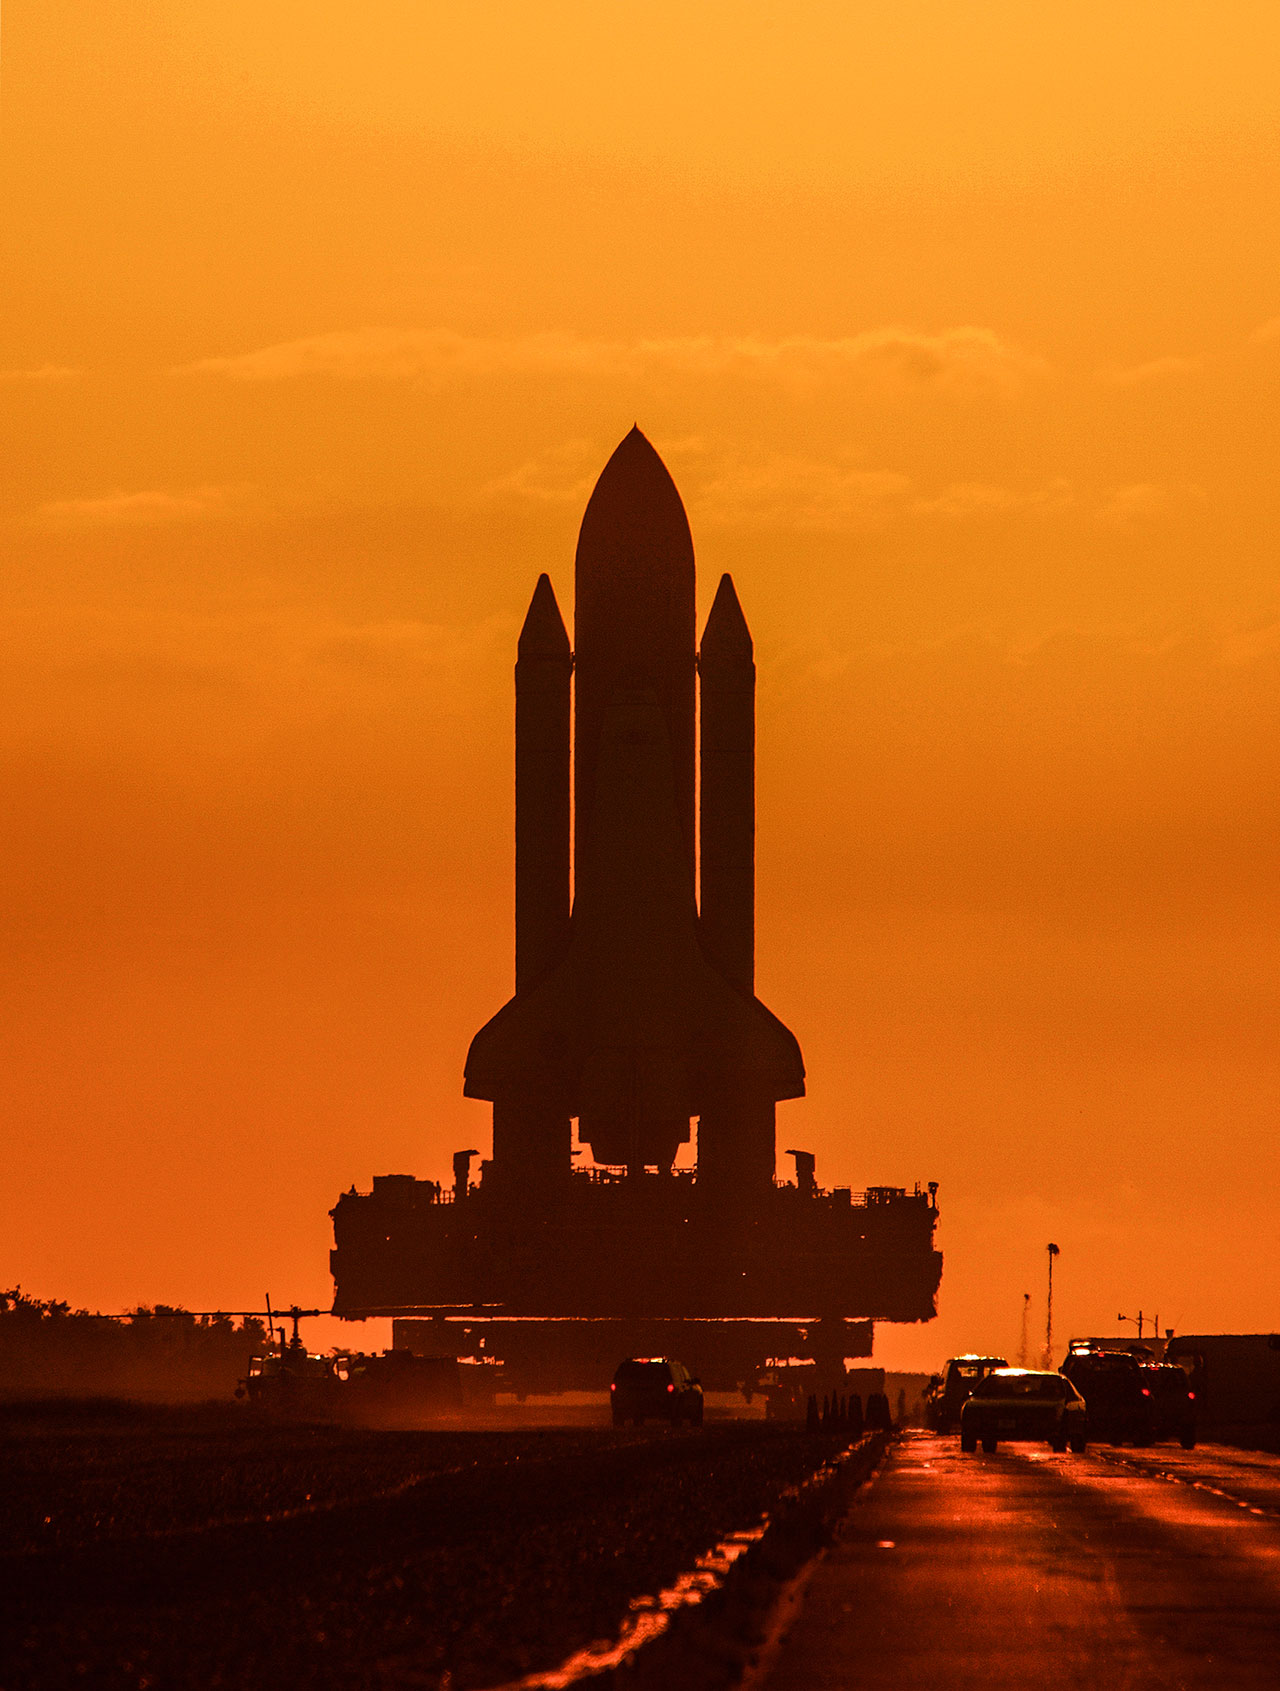 Sunrise rollout of Shuttle Discovery in 2005.